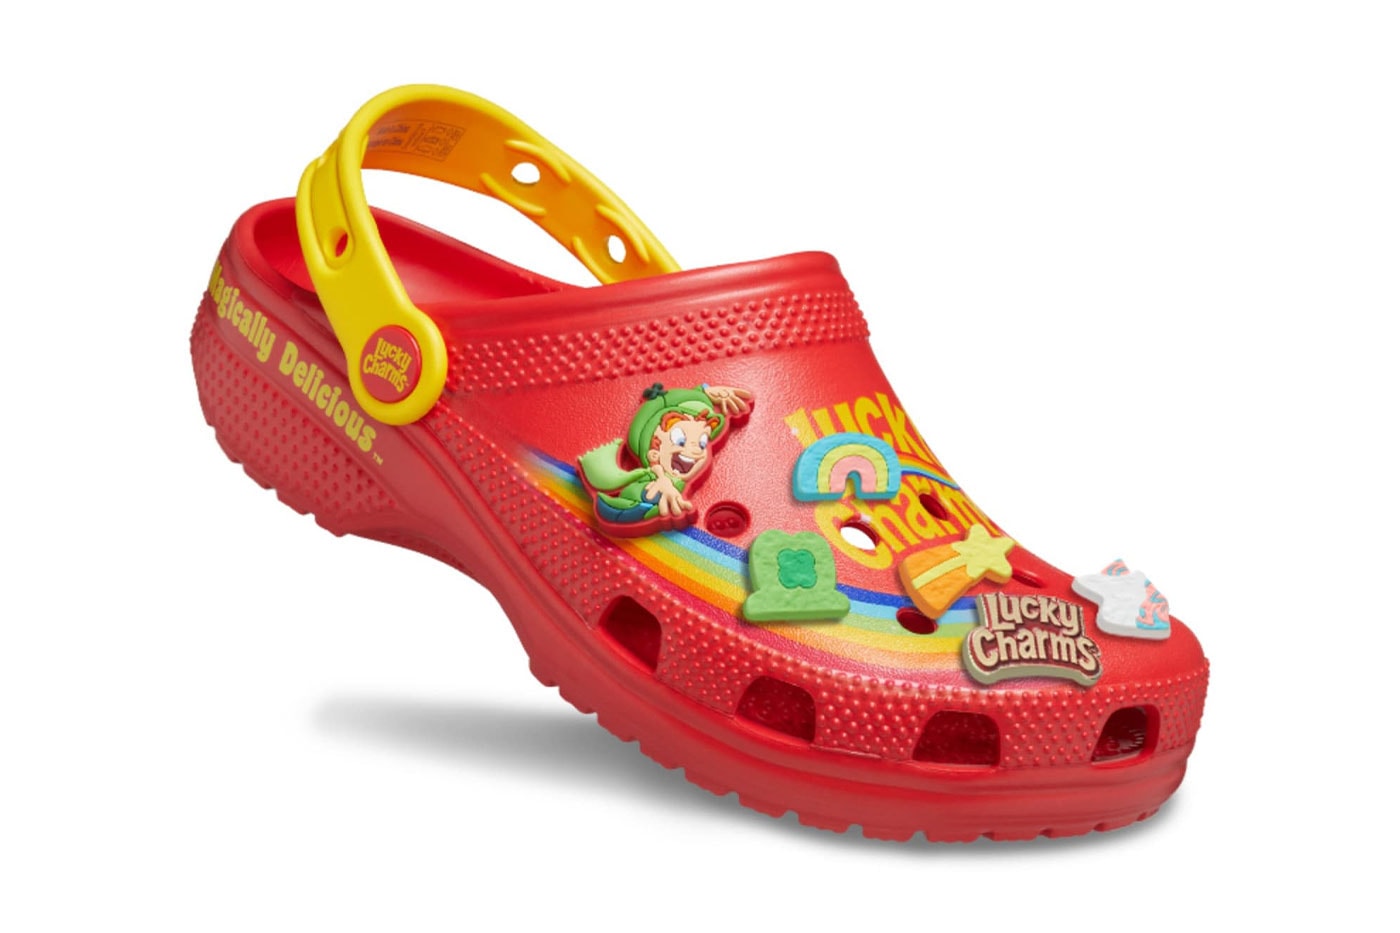 Lucky Charms Red Crocs Cereal Jibbitz Release